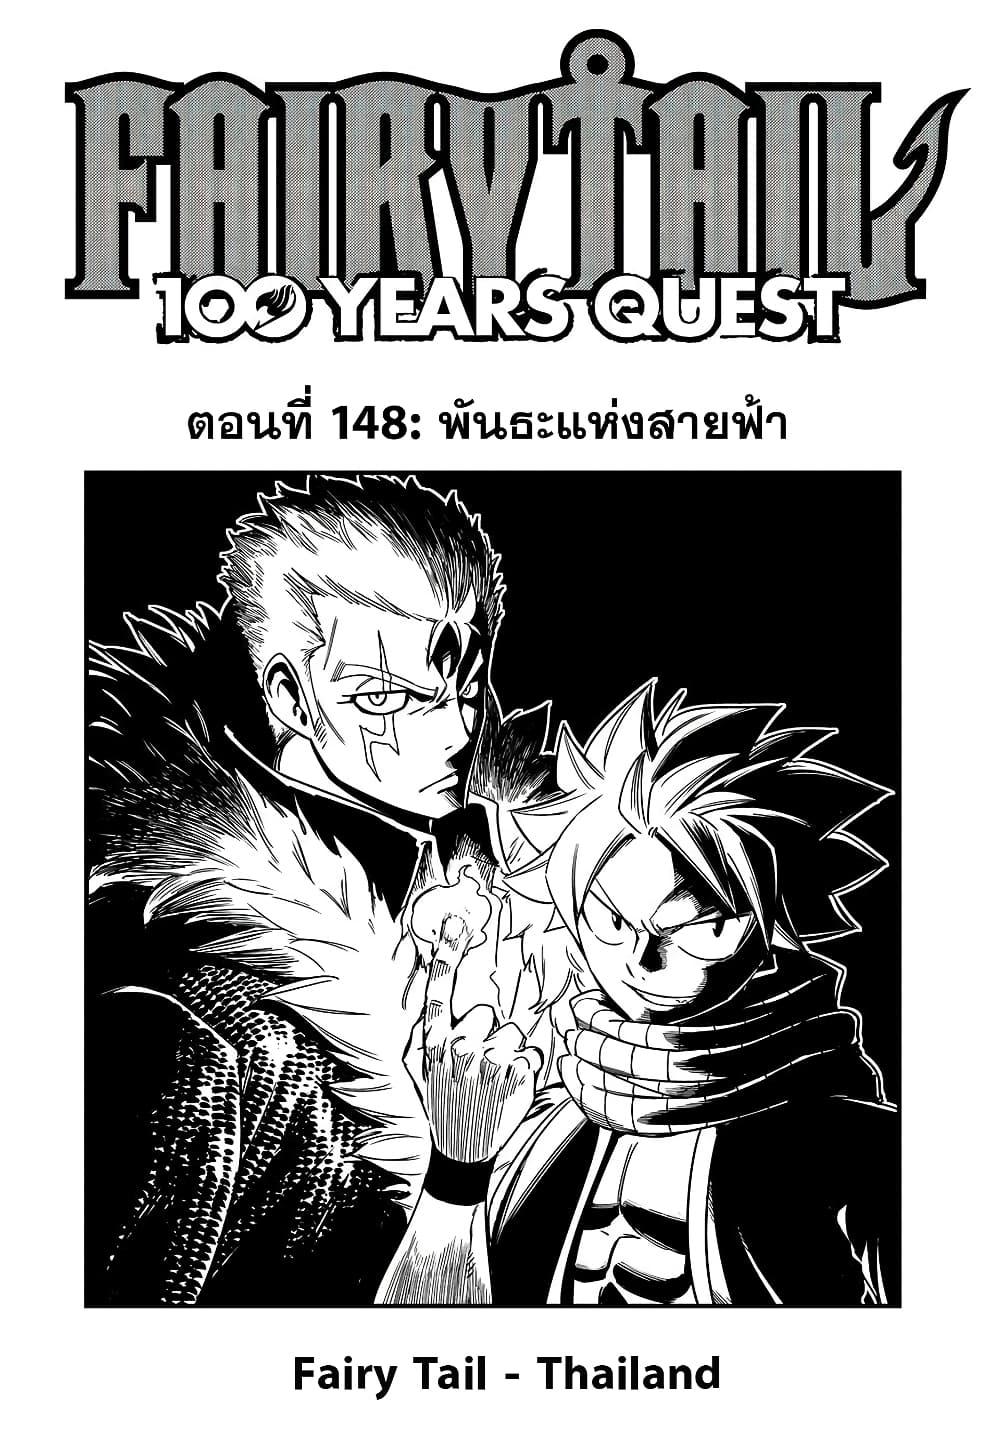 Fairy Tail 100 Years Quest 148 01